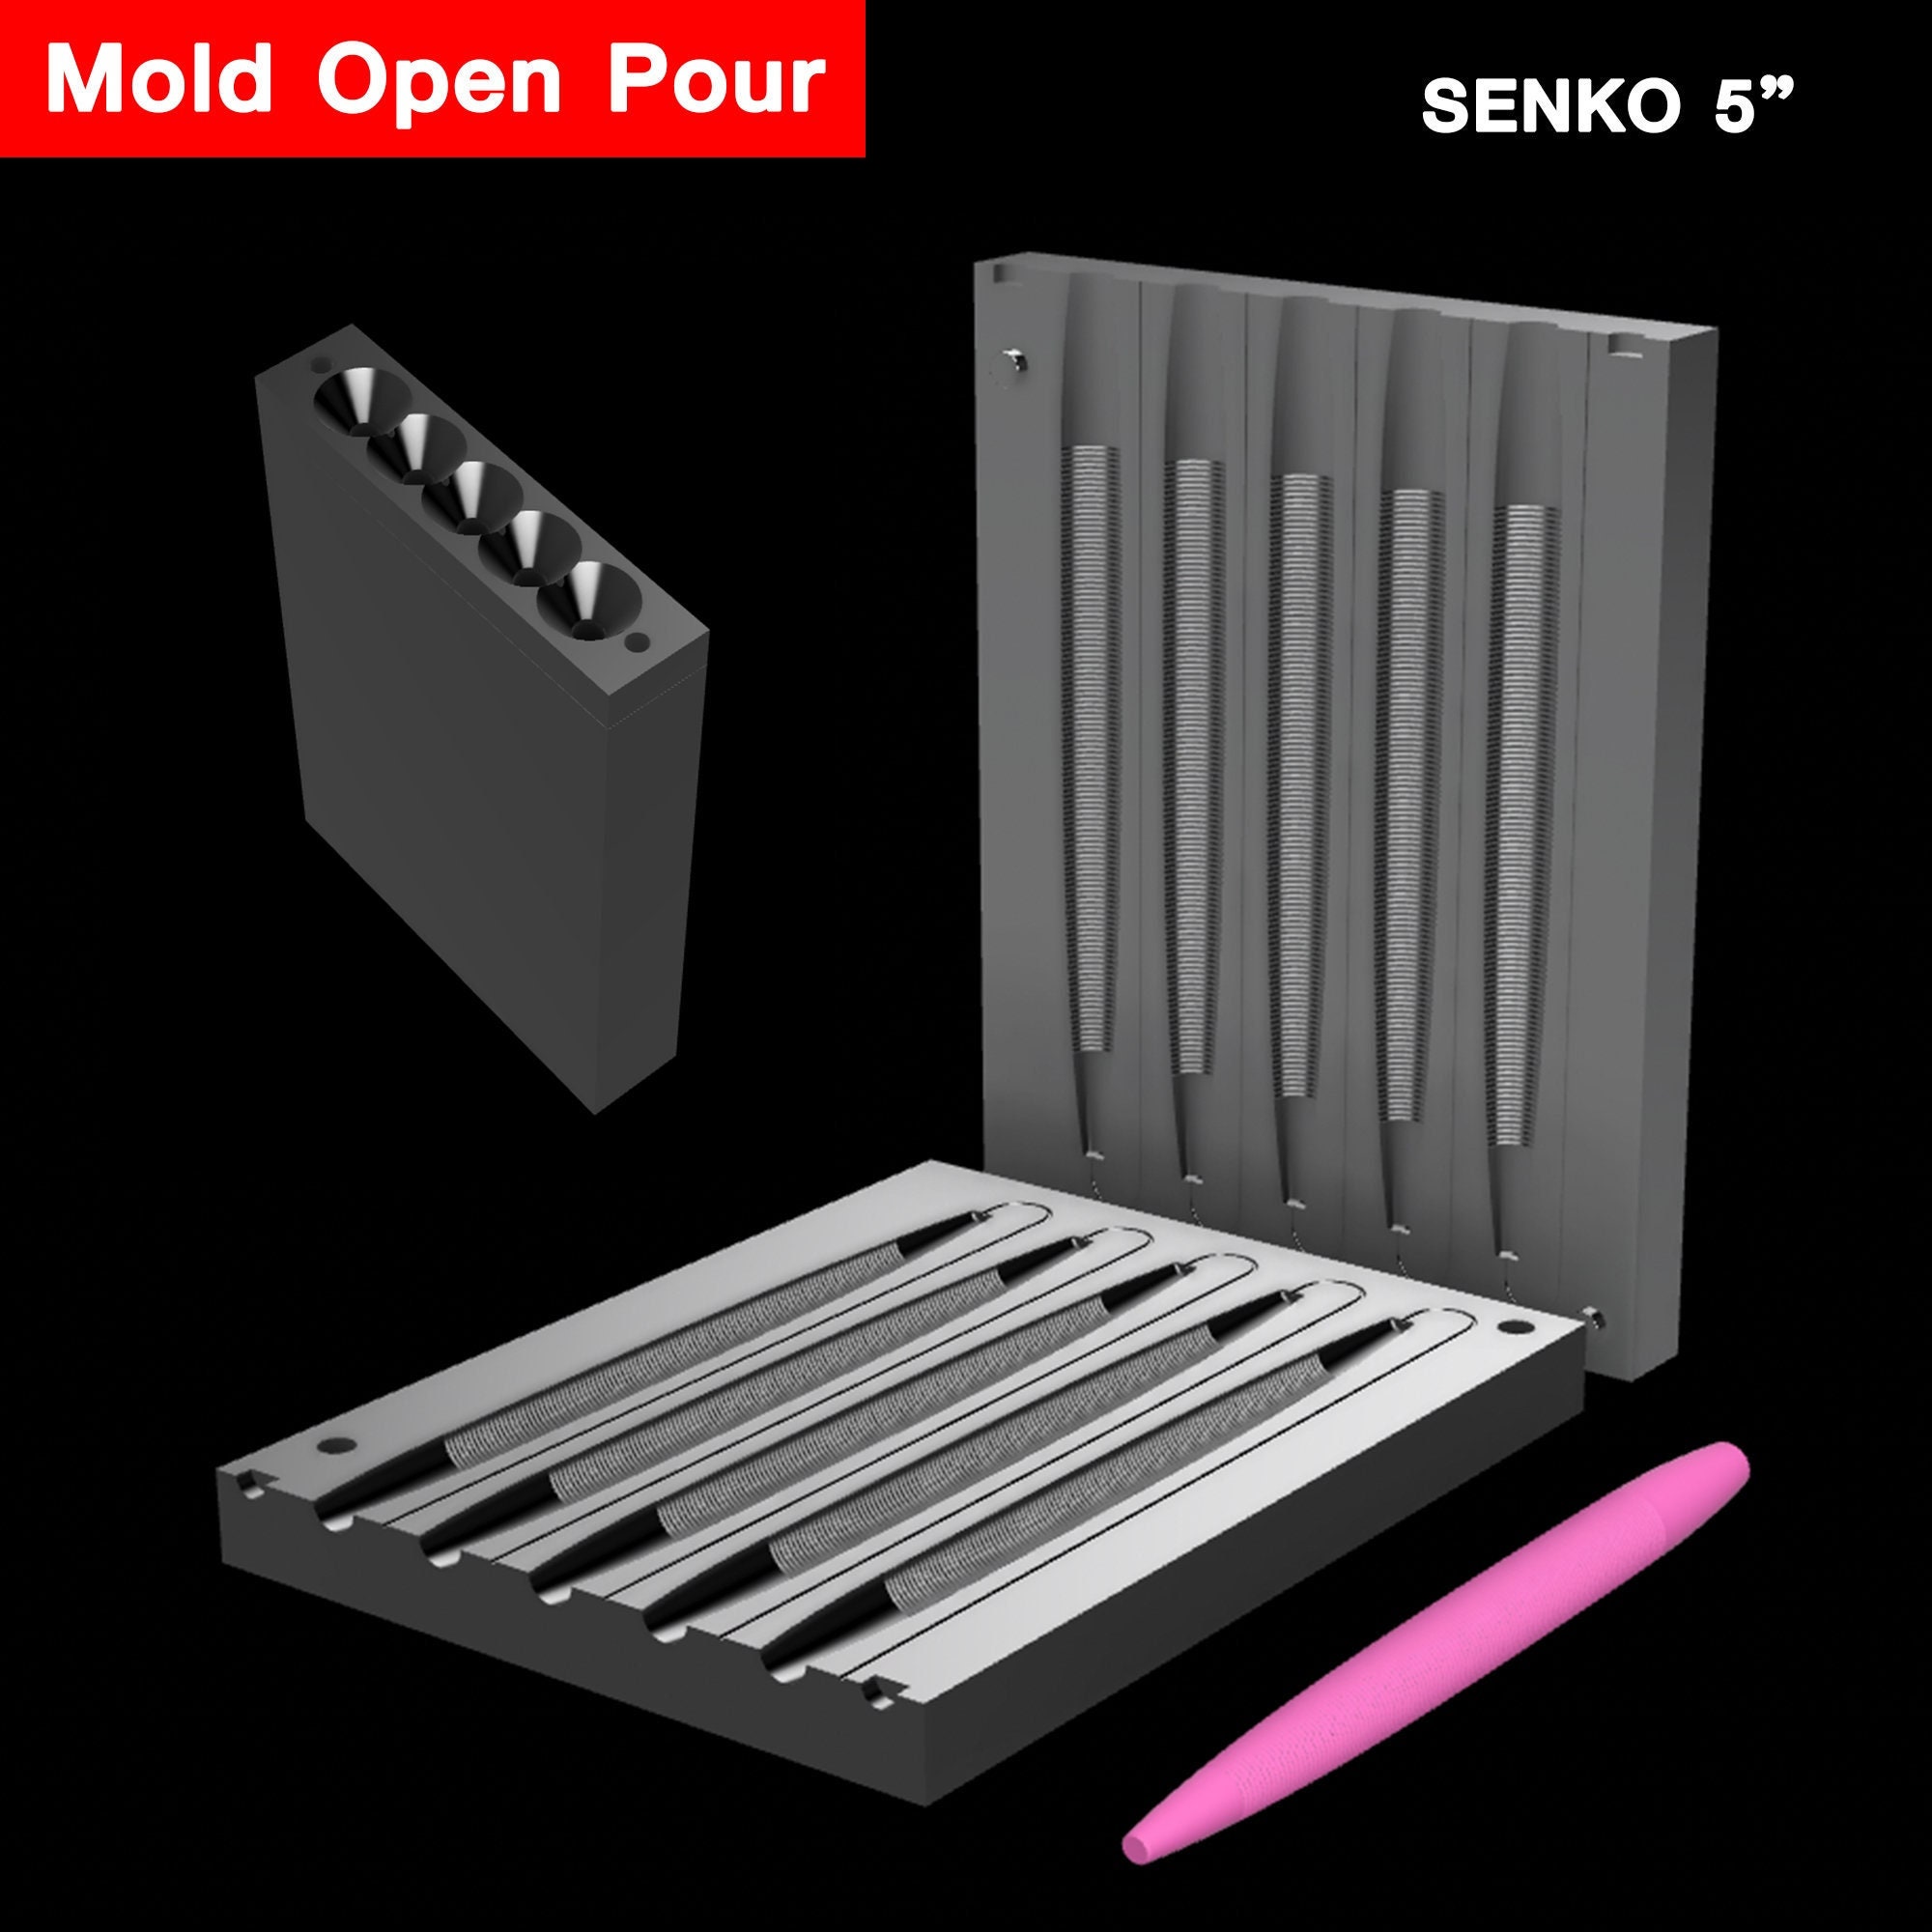 Digital File : Open Pour Mold SENKO 5 Stl, Step File for Cnc and 3d Print 